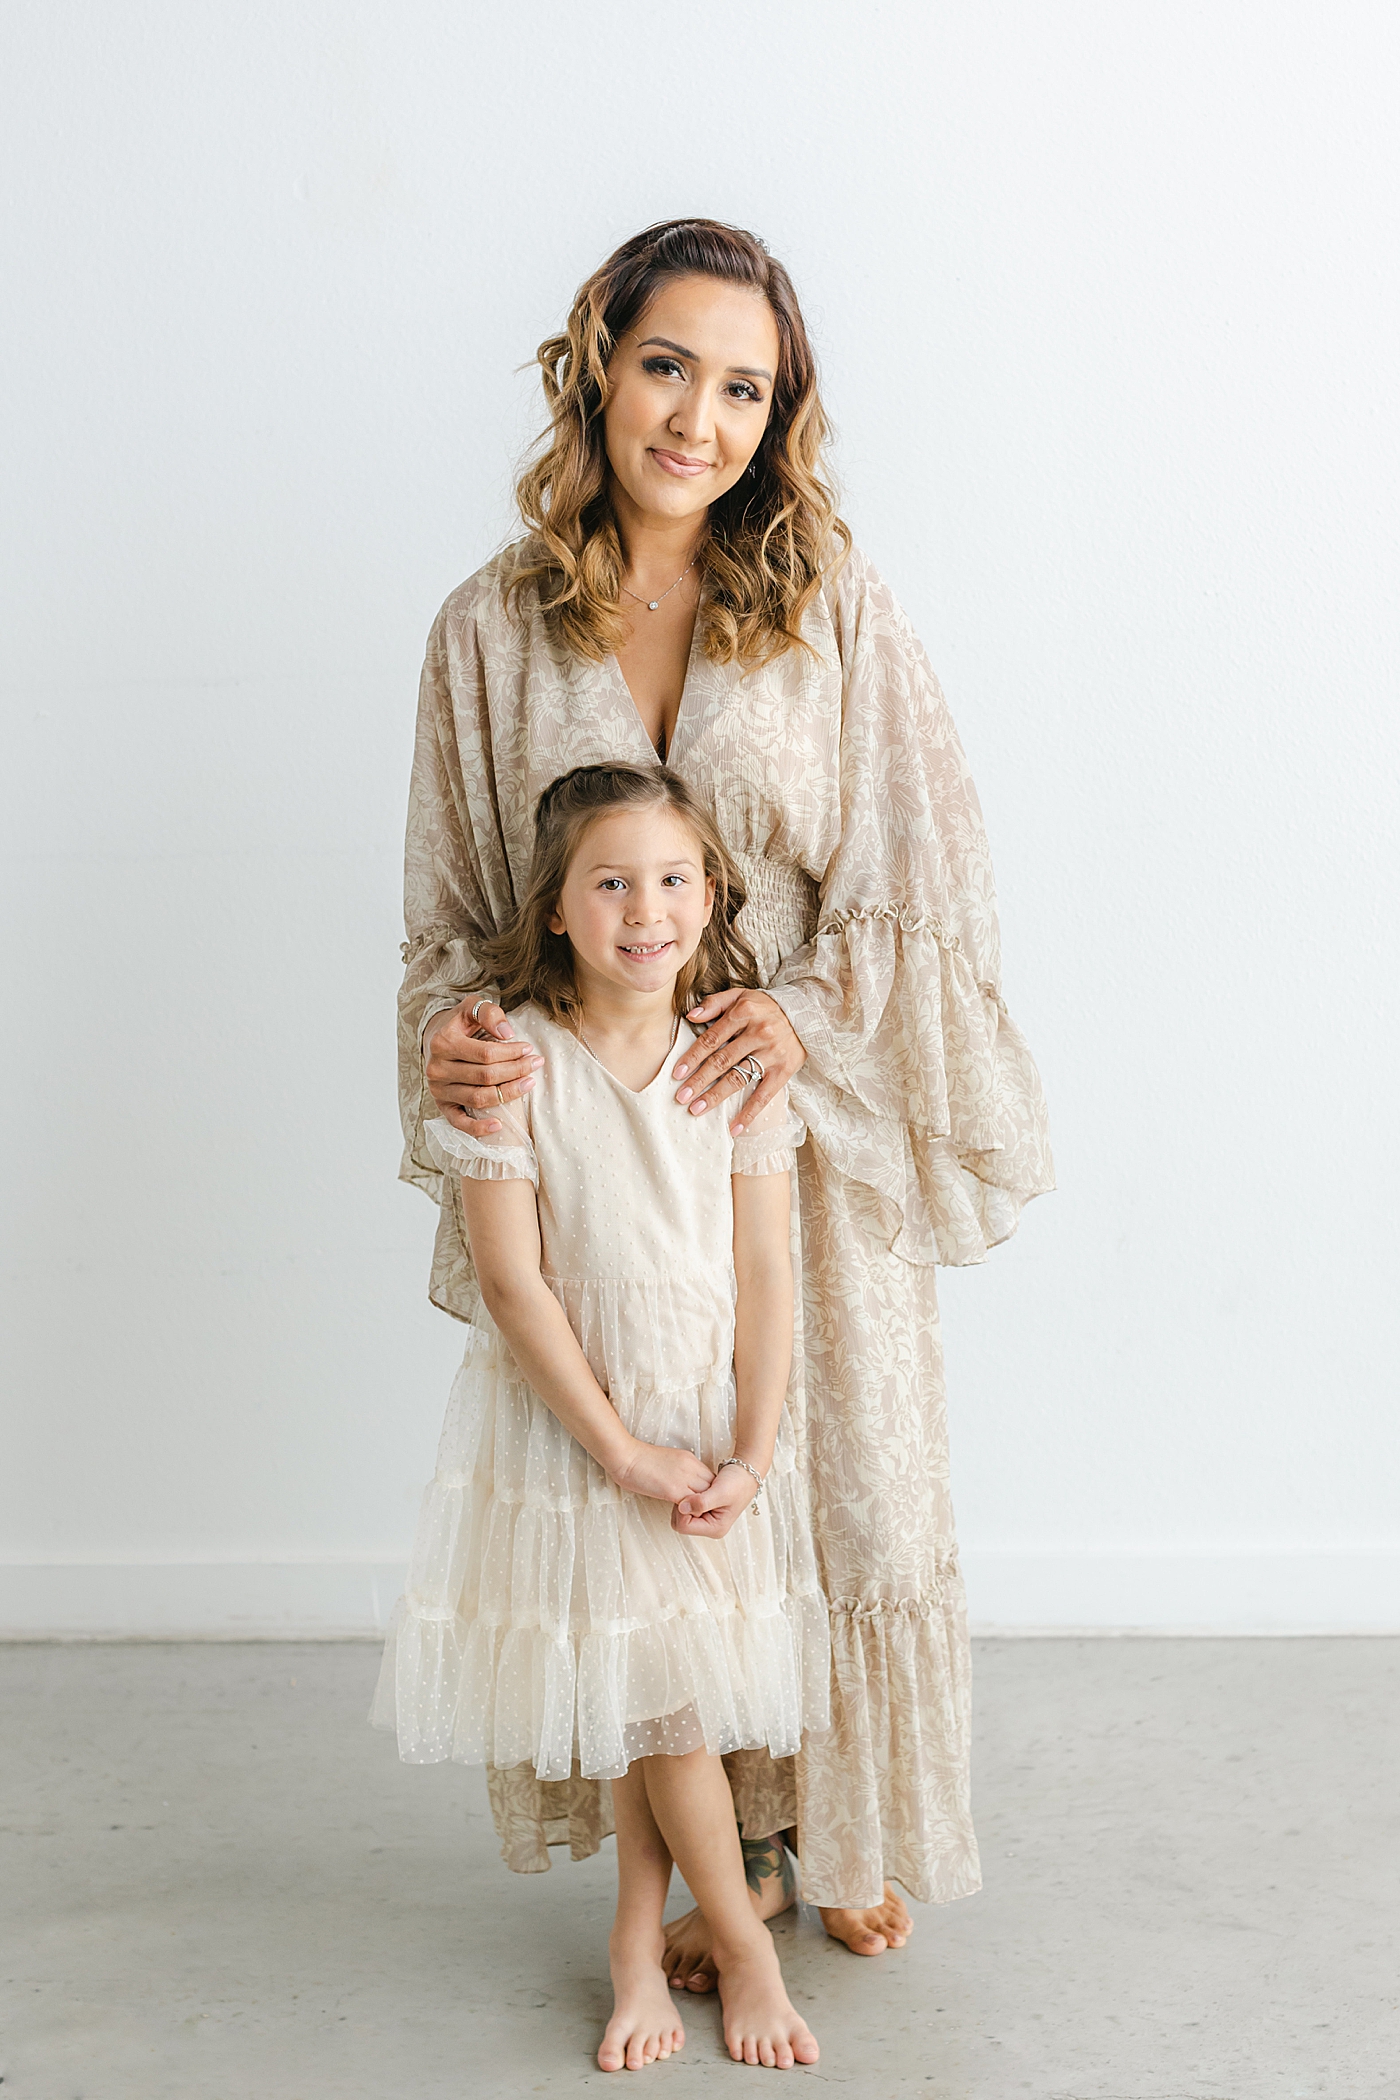 Mom standing with her daughter during their Studio Family Session in Austin | Photo by Sana Ahmed Photography